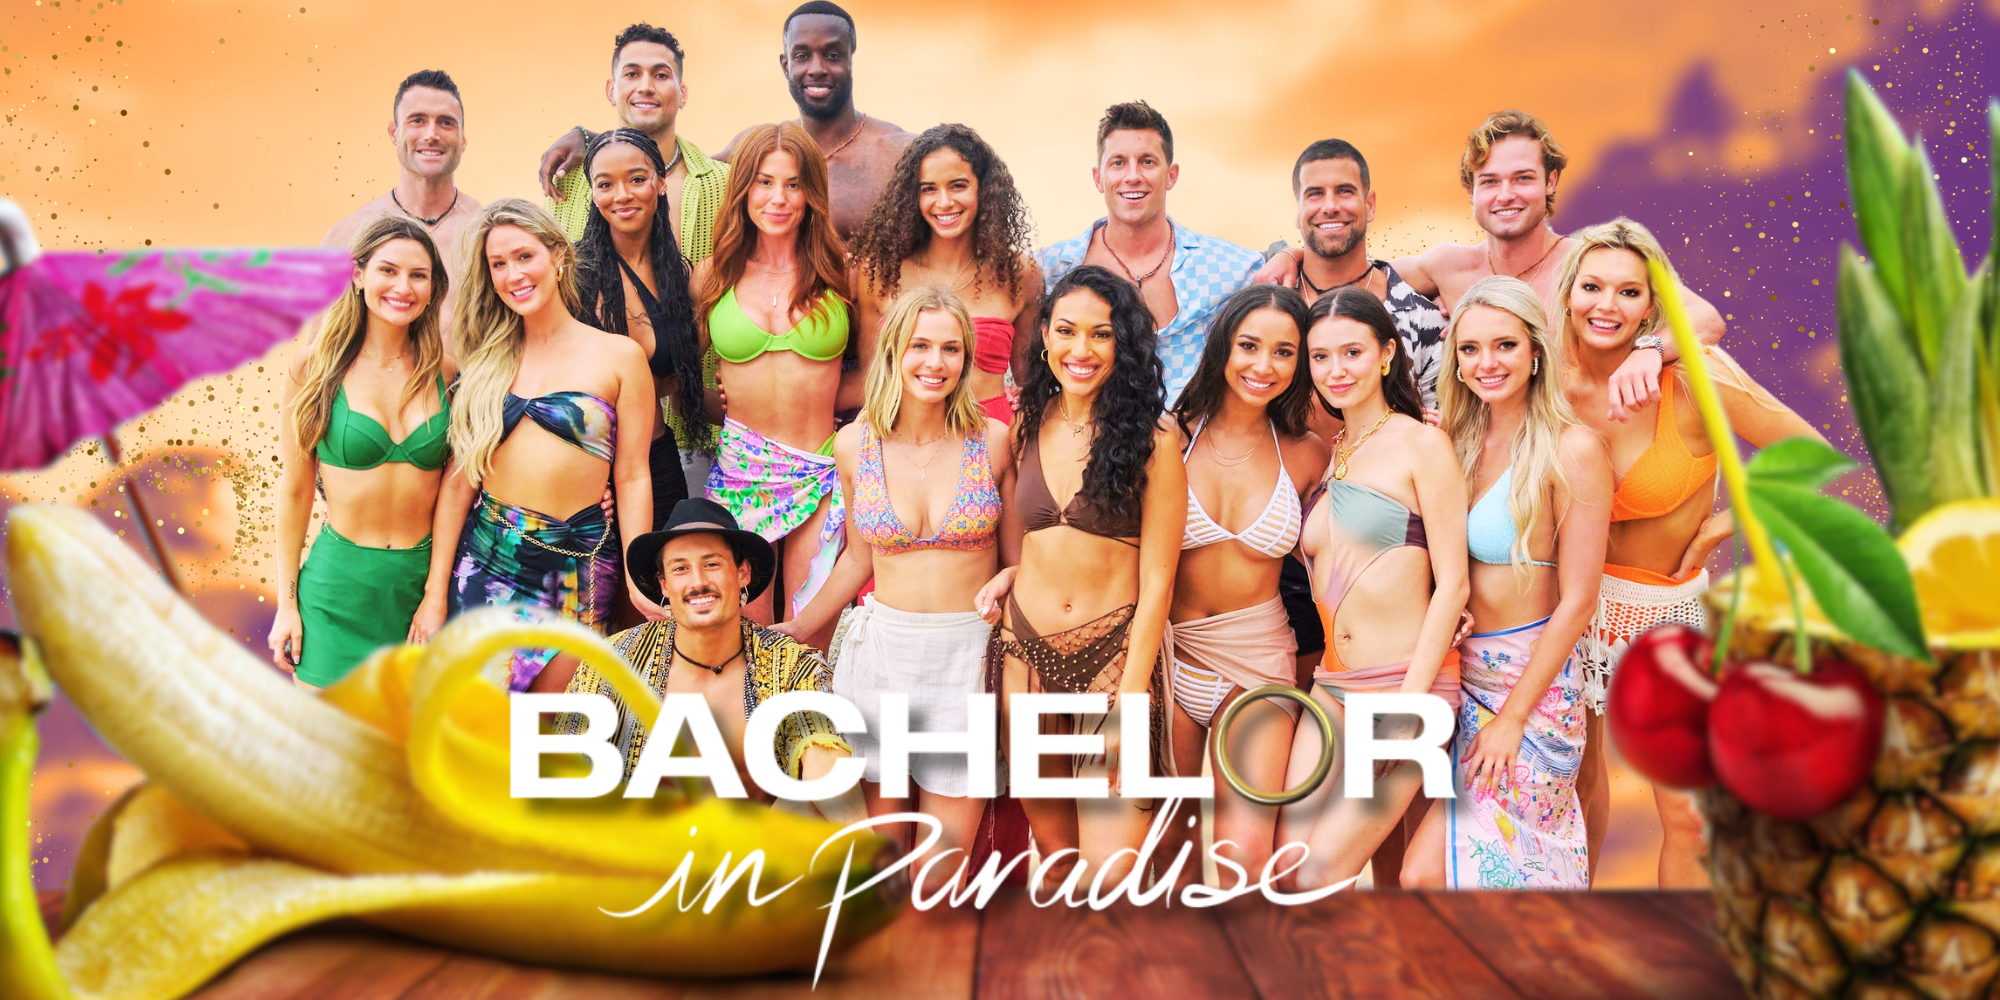 The Bachelor In Paradise Season 9 cast promo photo with tropical background